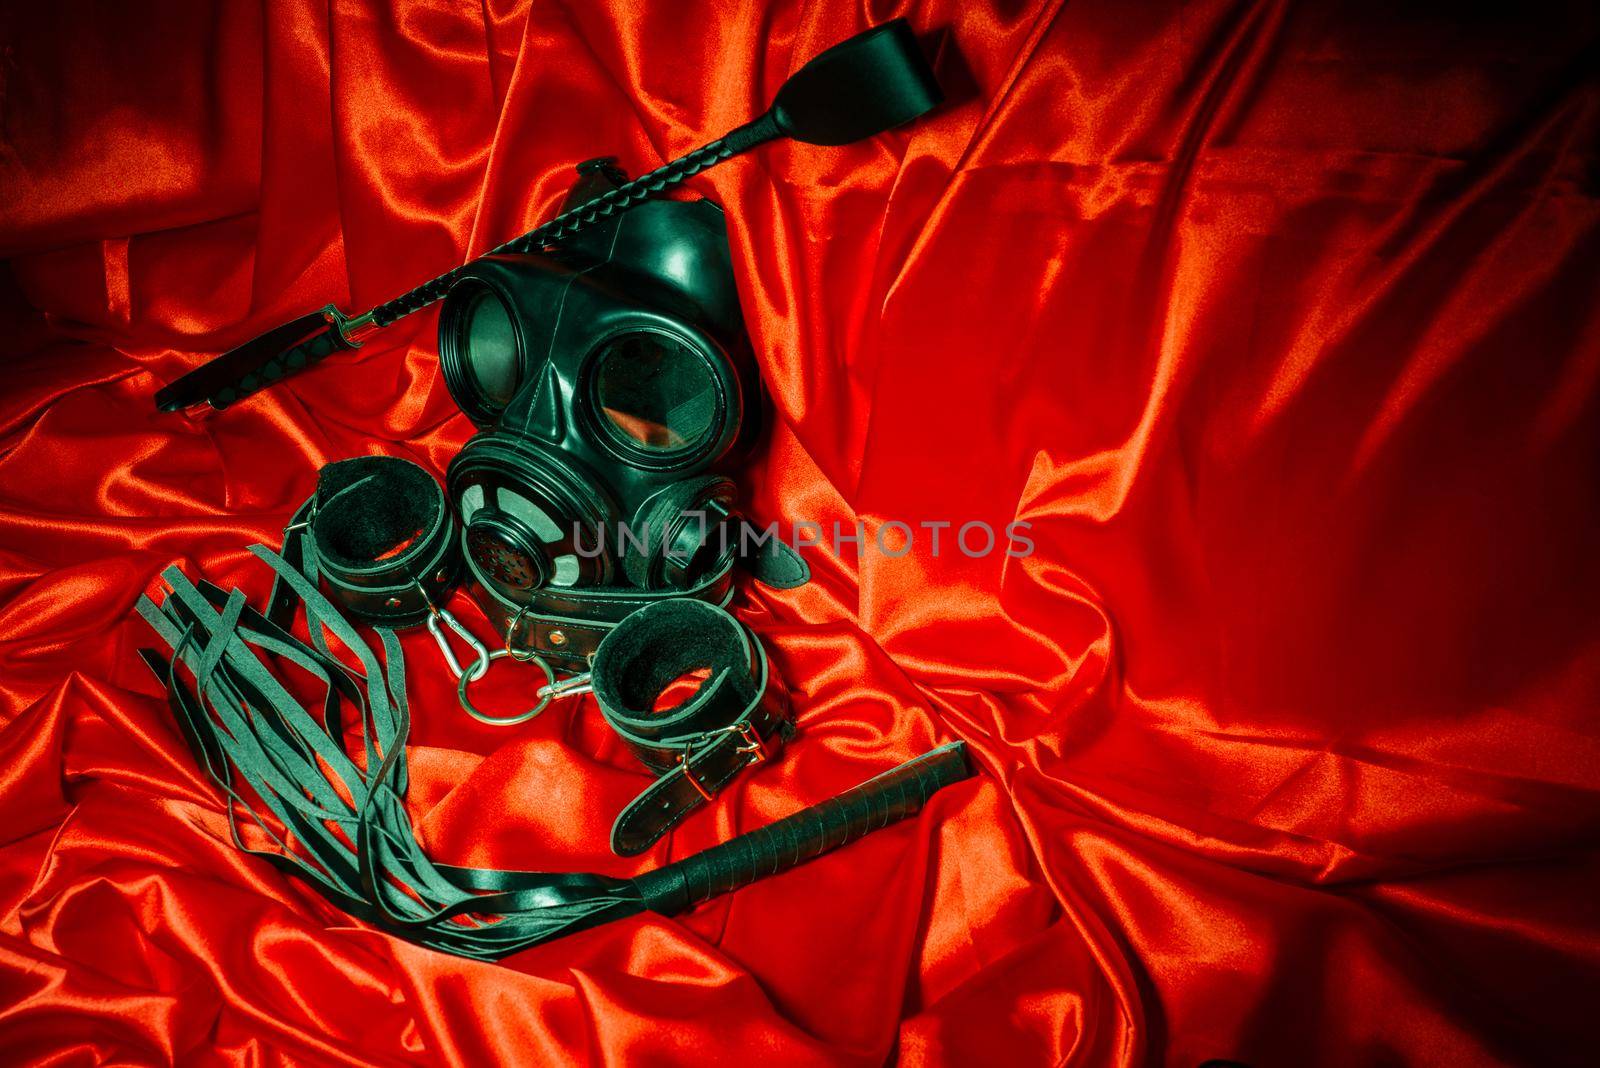 Close up bdsm outfit. Bondage, kinky adult sex games, kink and BDSM lifestyle concept with gas mask, whip, collar, leather handcuffs , lash on red silk with copy space.